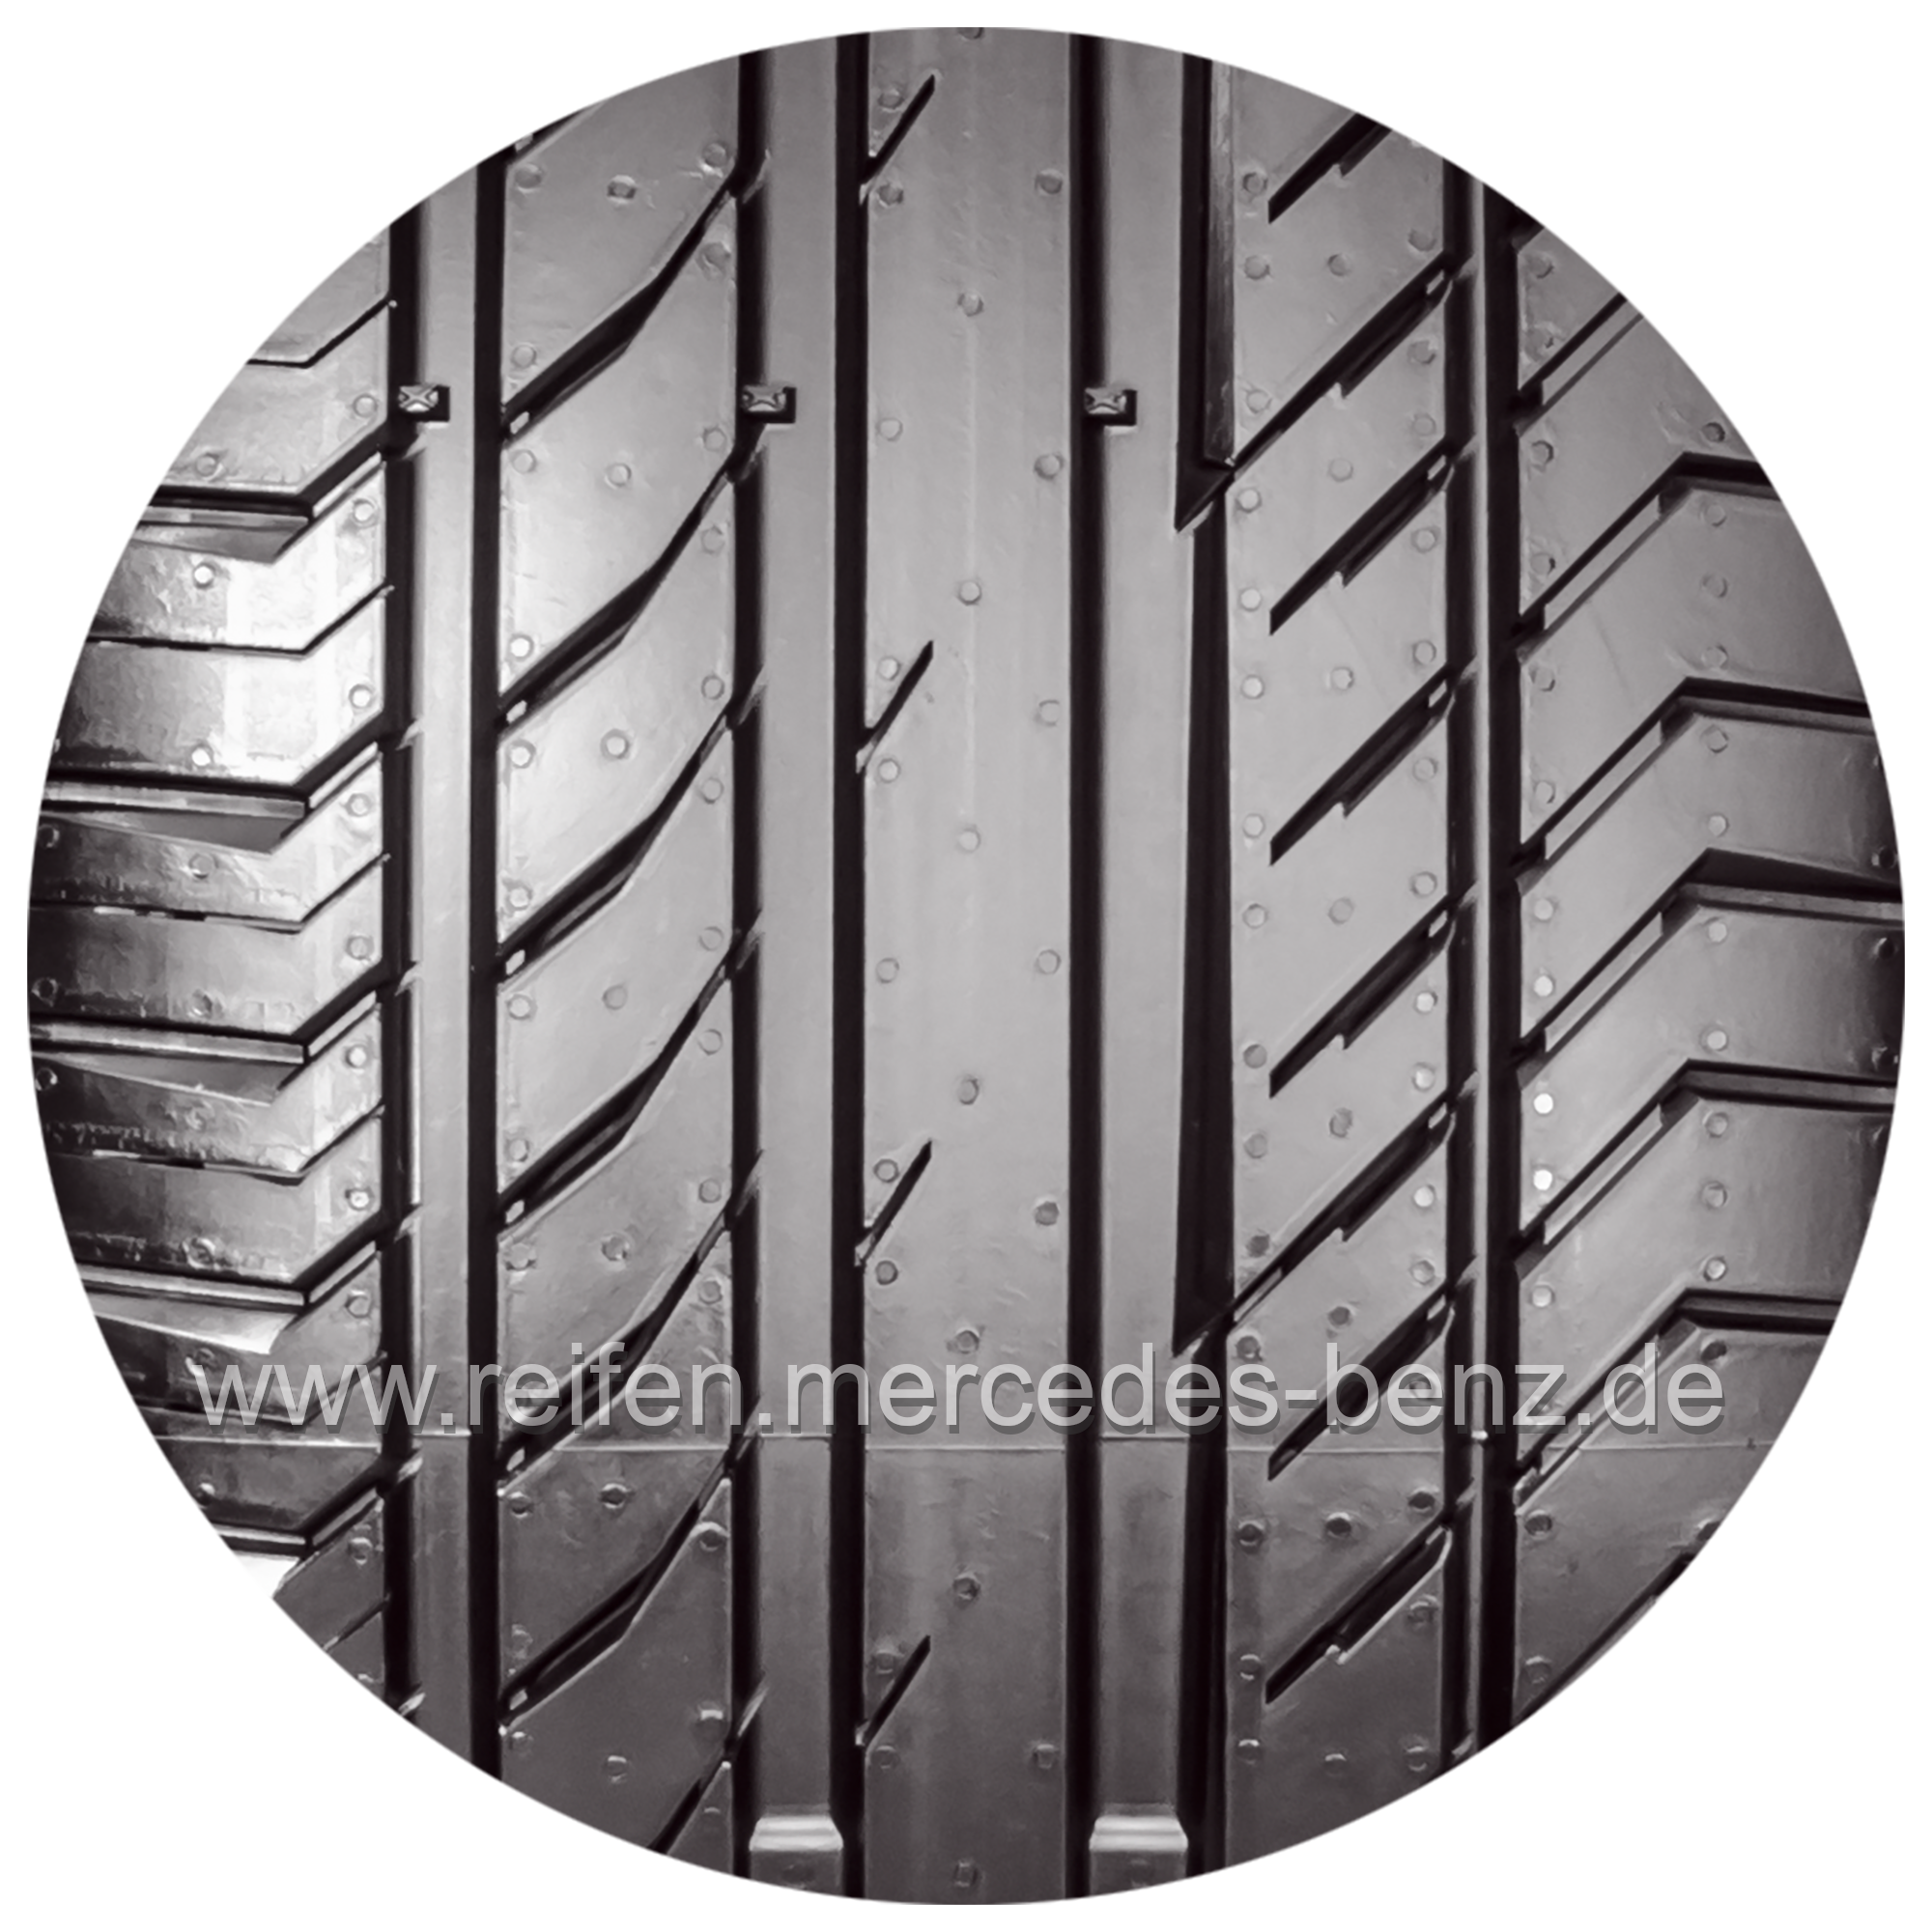 Continental ContiSportContact 5 MOE, Continental, ContiSportContact 5 MOE, 255/35 R19 96Y XL, Sommer, Q44041111012A